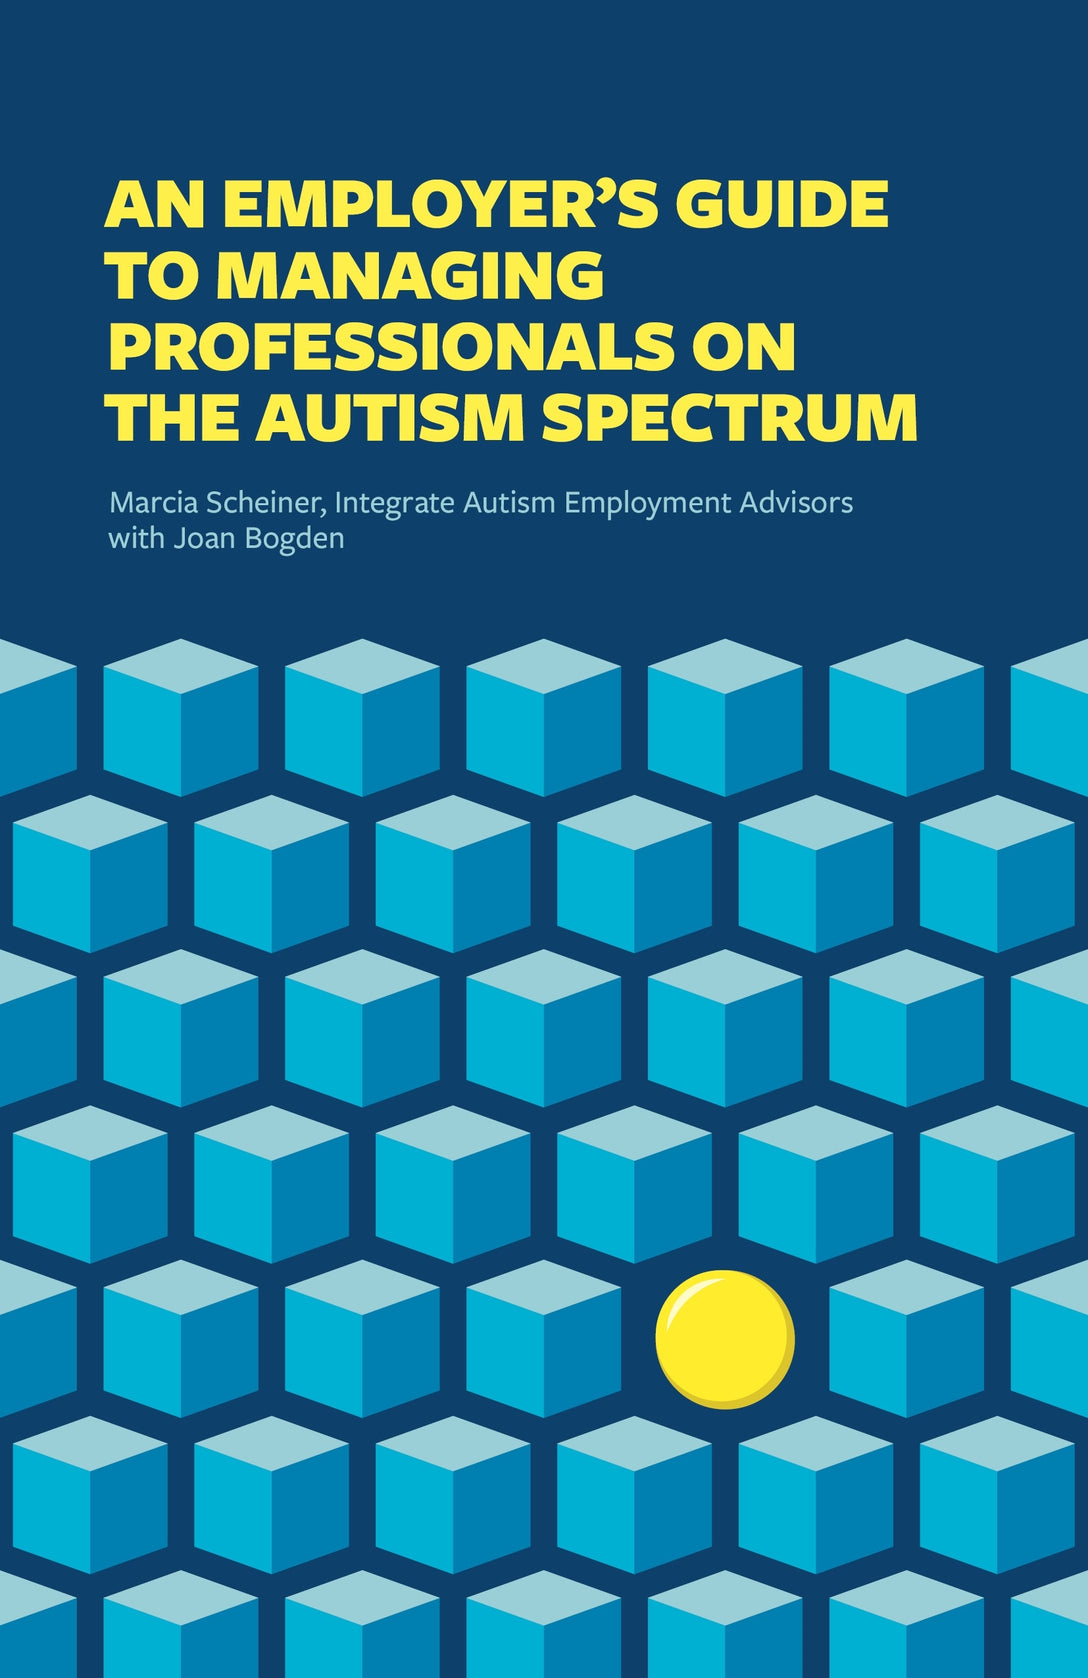 An Employer's Guide to Managing Professionals on the Autism Spectrum by Meron Philo,  Integrate, Marcia Scheiner, Joan Bogden